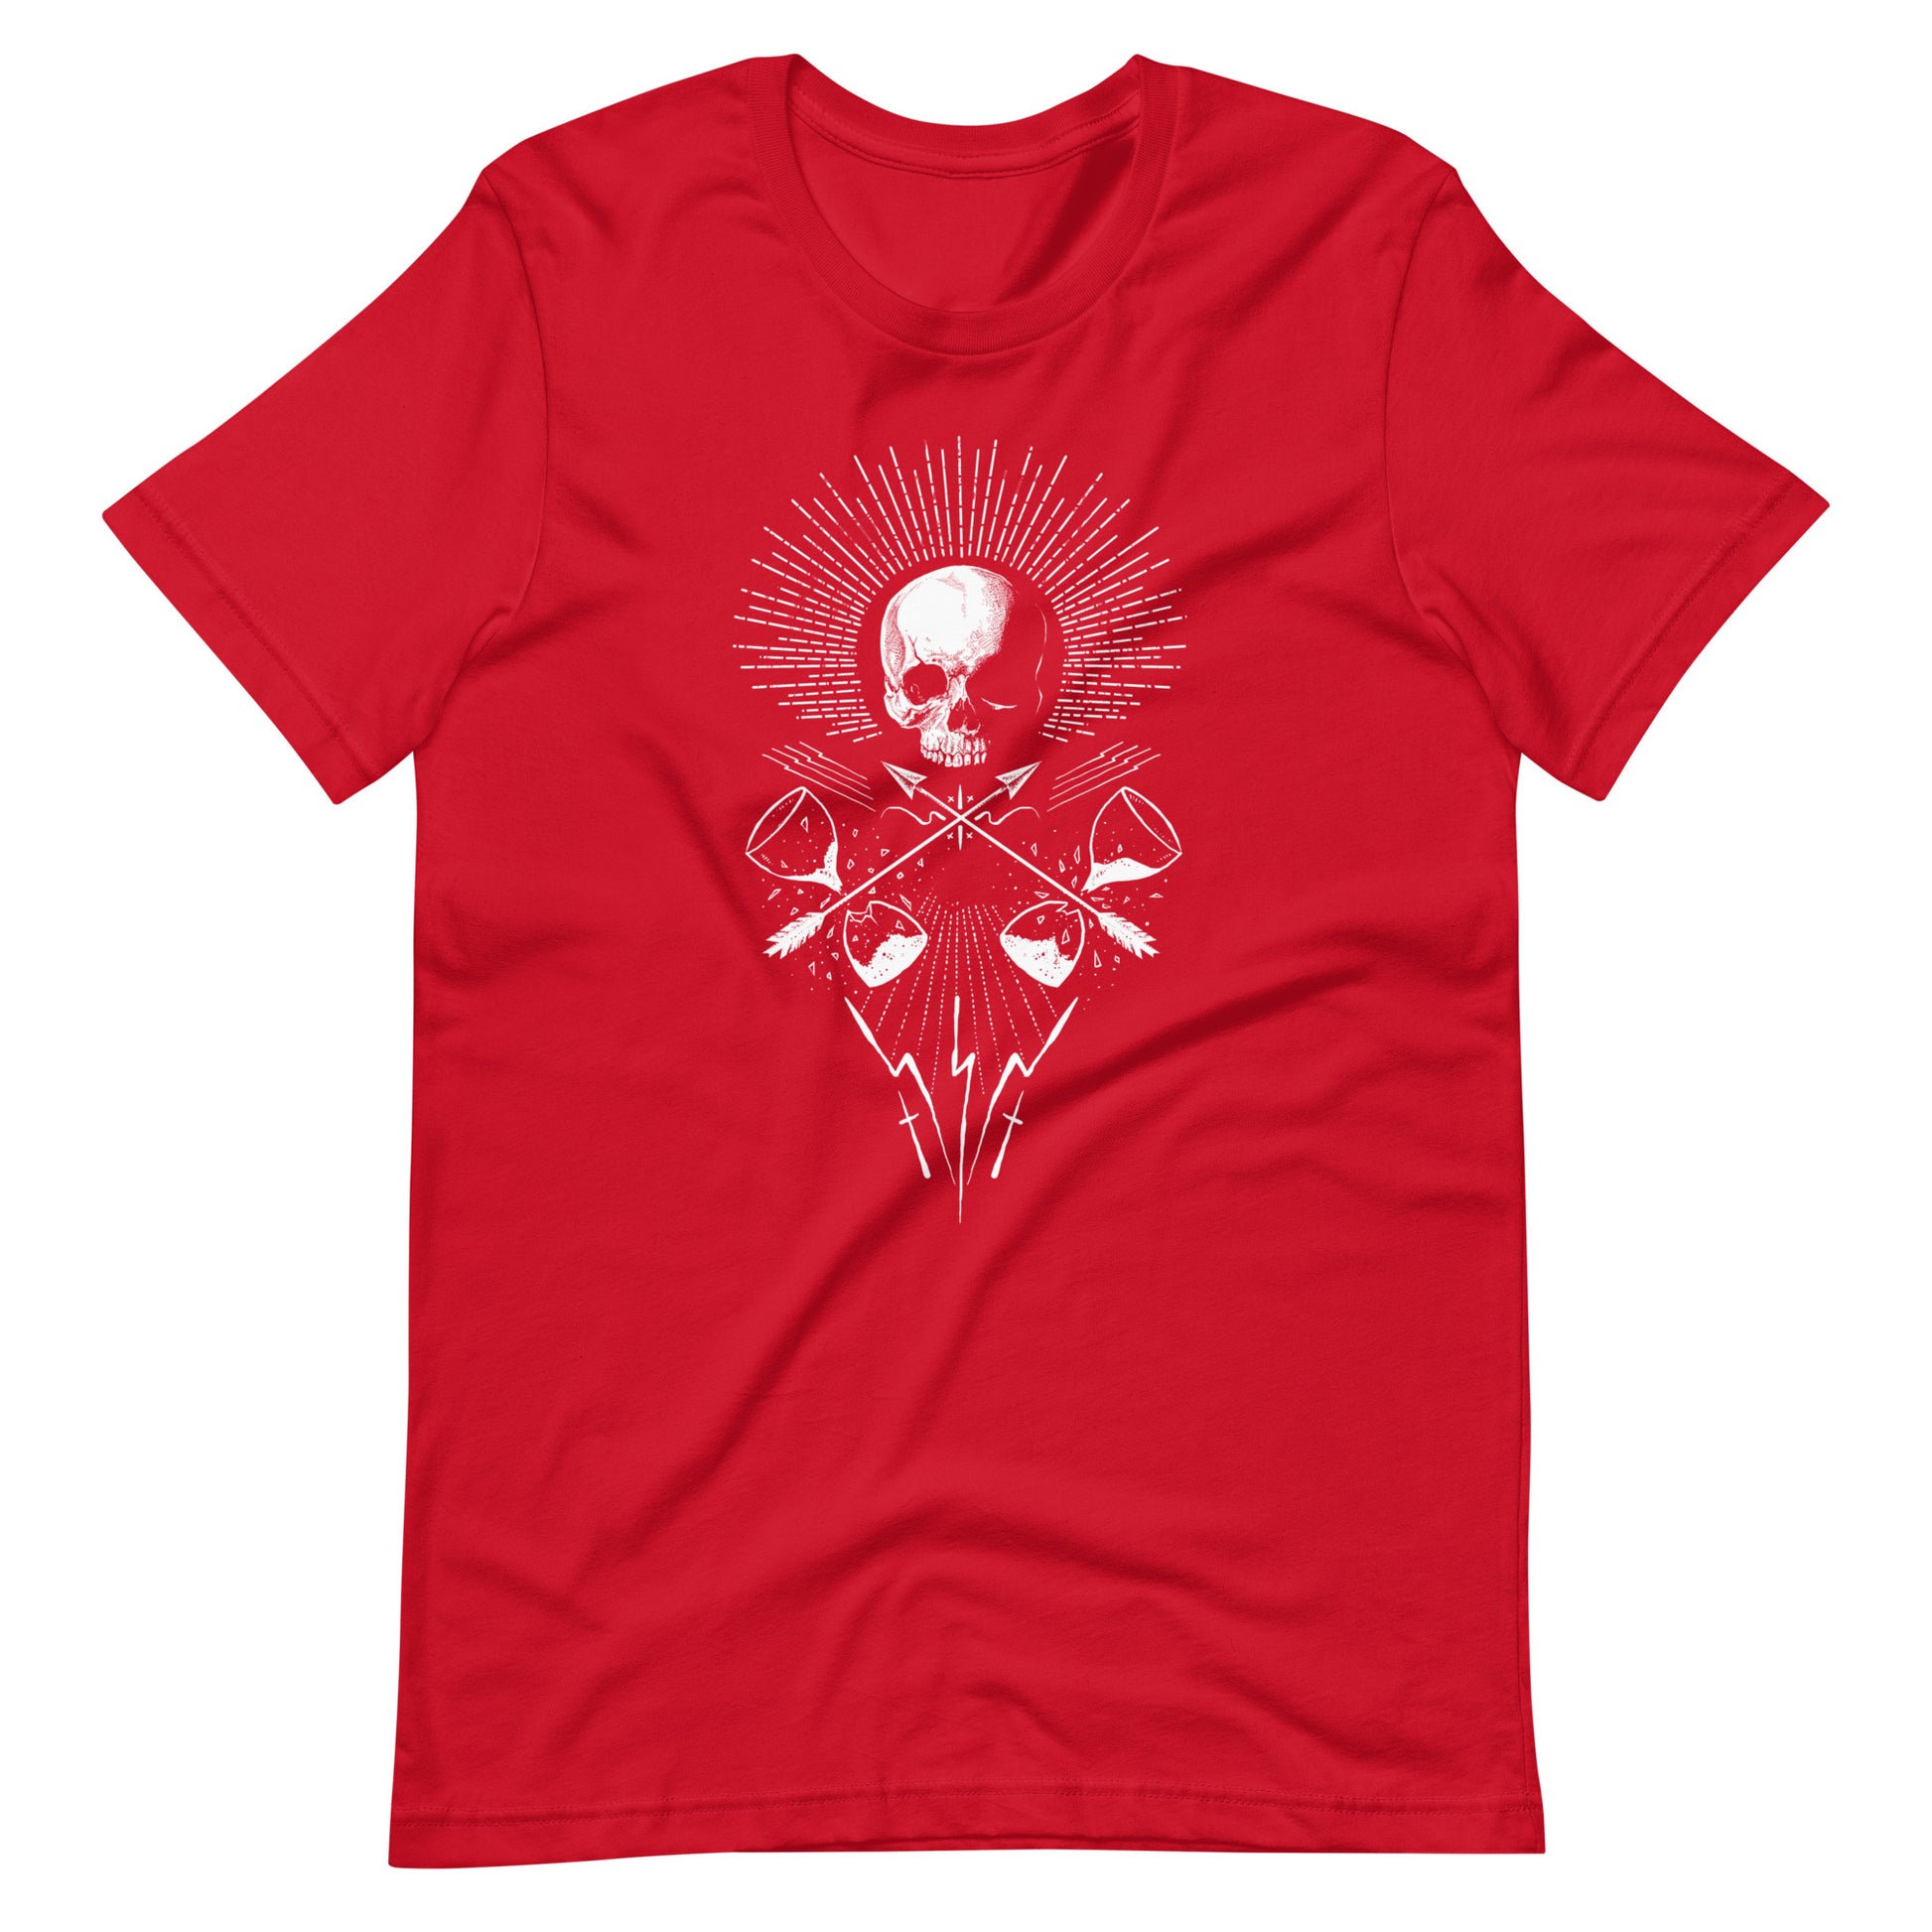 For the Sake of Future - Men's t-shirt - Red Front